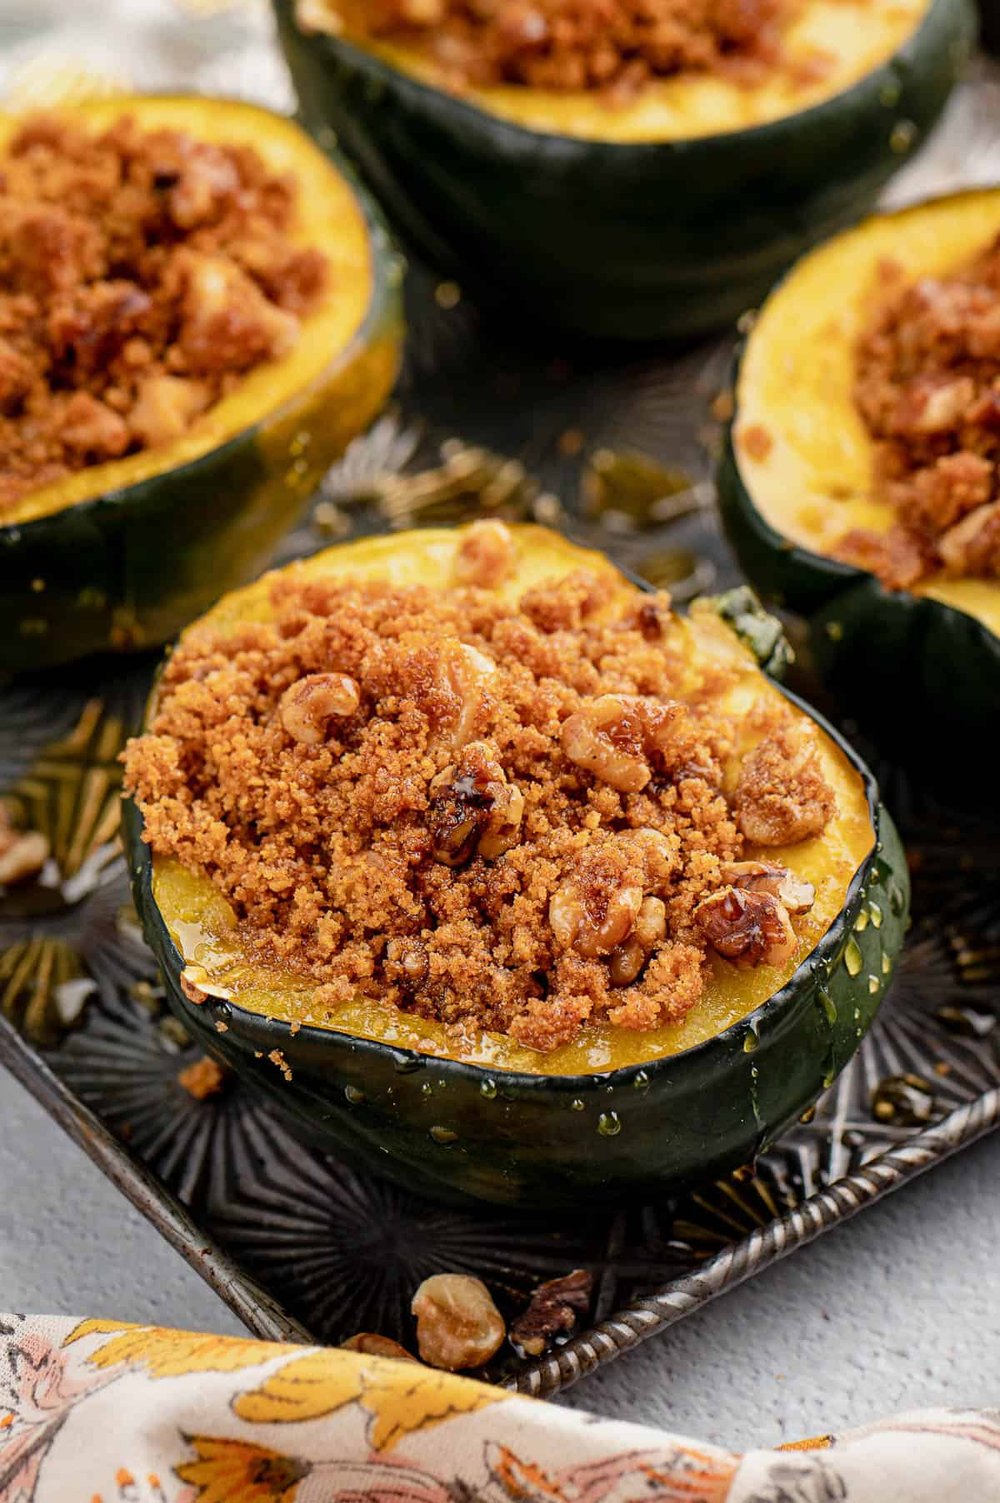 Oven Baked Acorn Squash with Sweet Filling